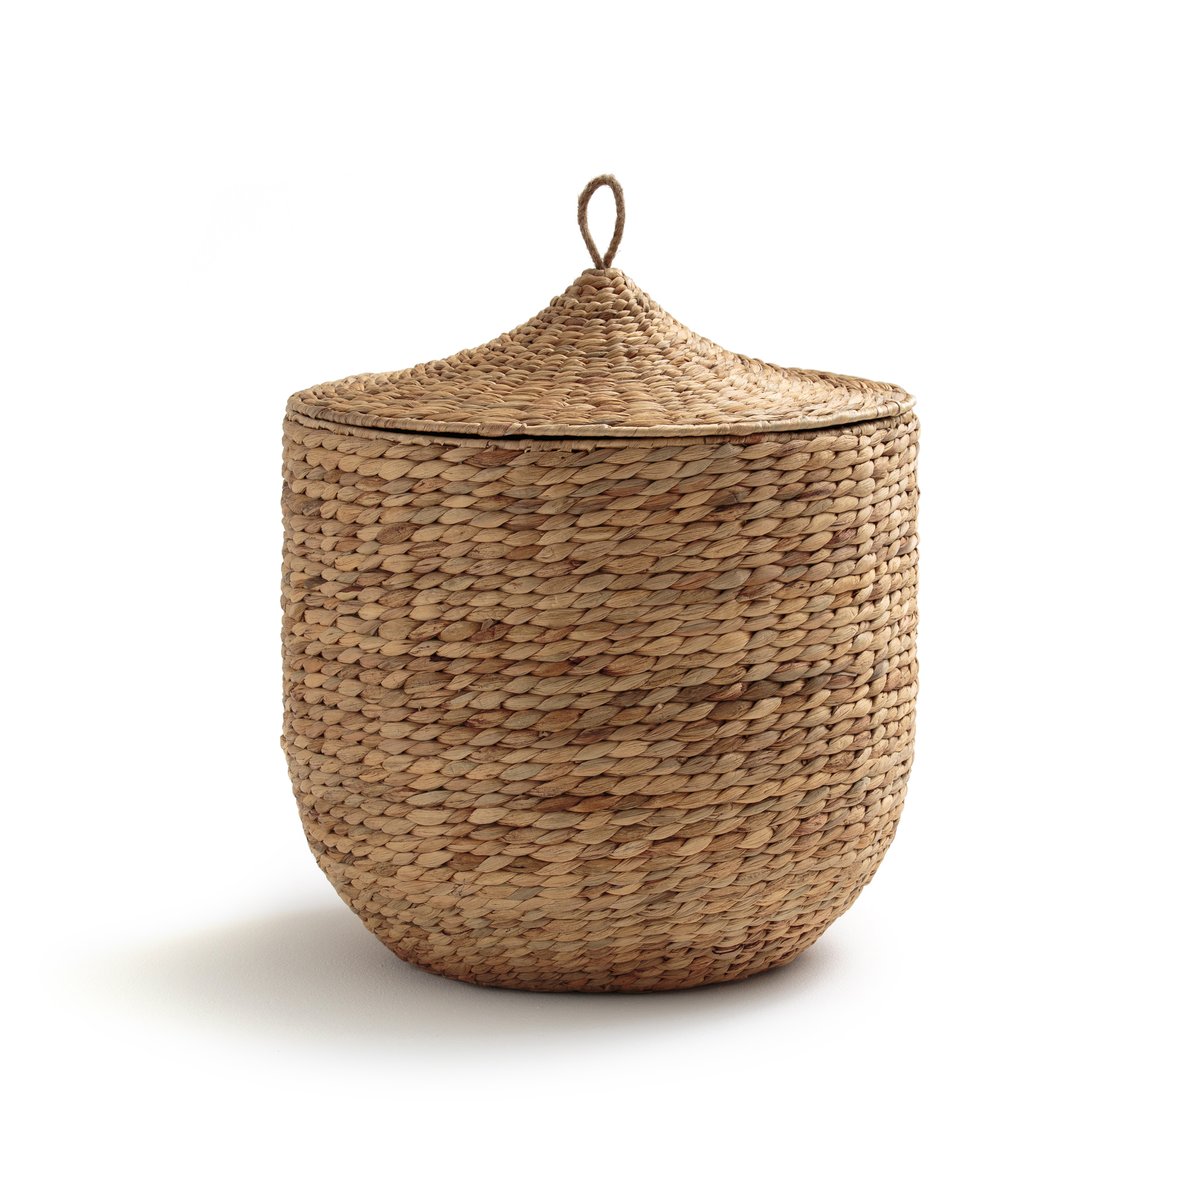 Image of Nomado Woven Basket with Lid